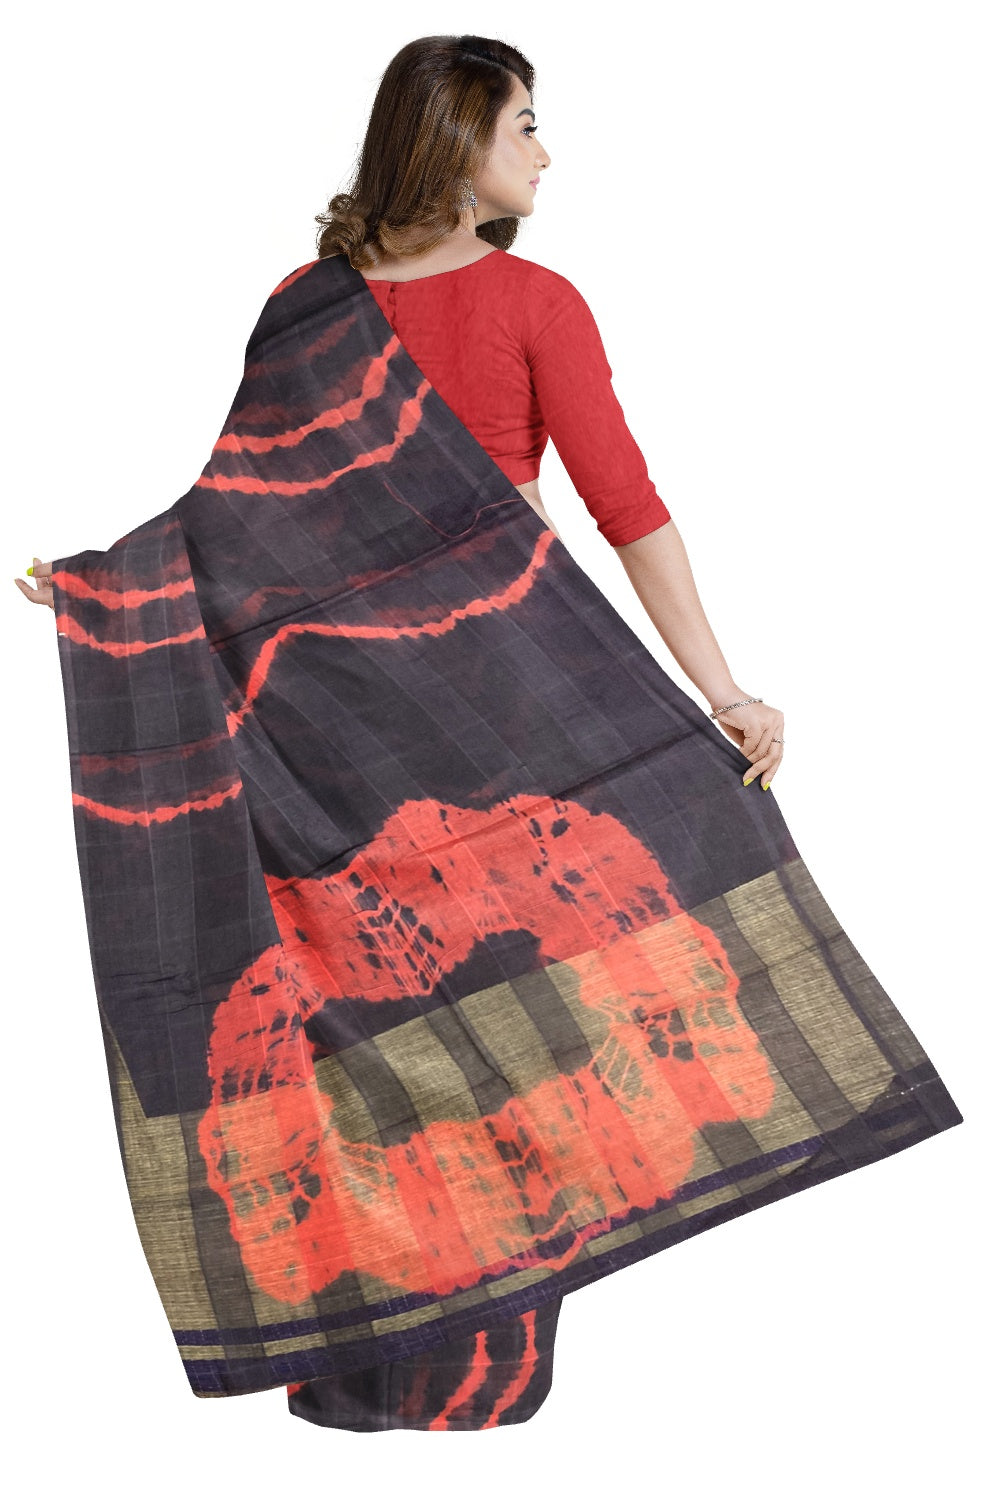 Southloom Cotton Navy Blue Red Saree with Red Blouse Piece